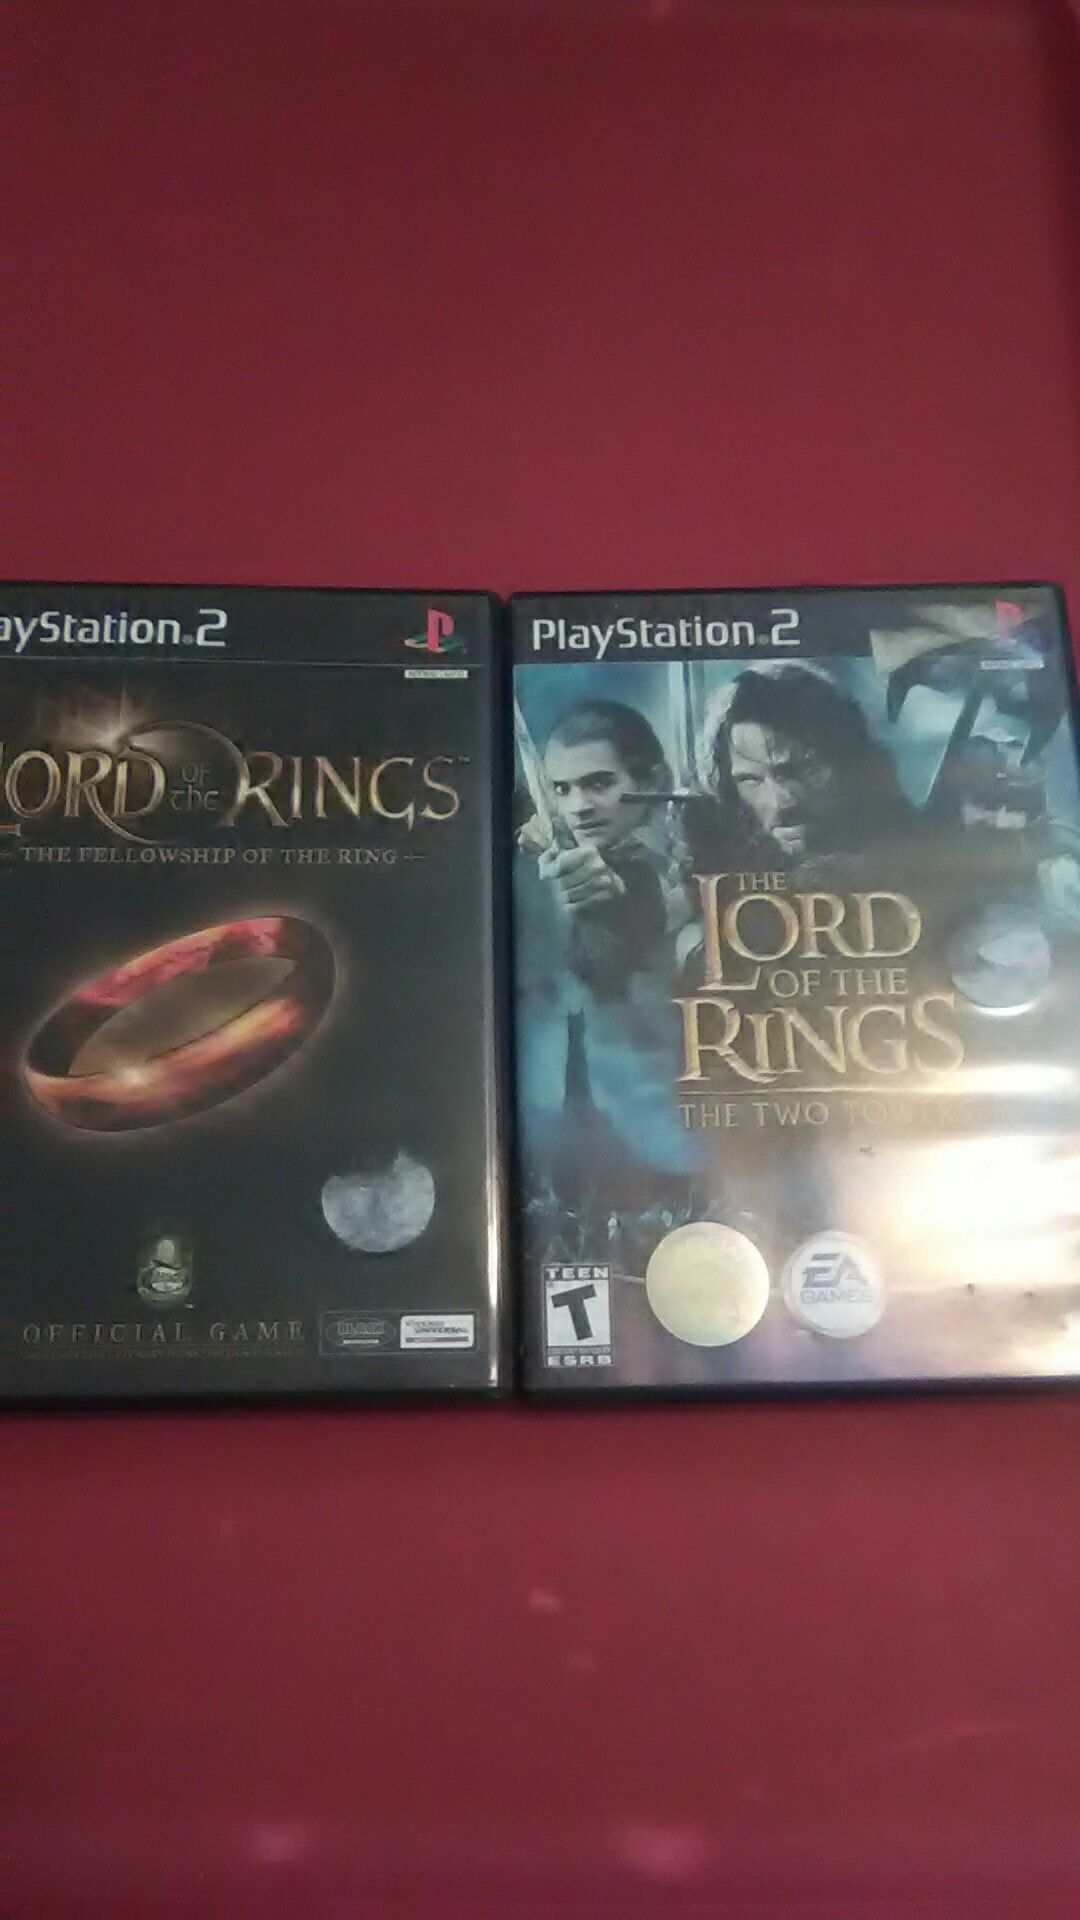 Lord of the rings ps2